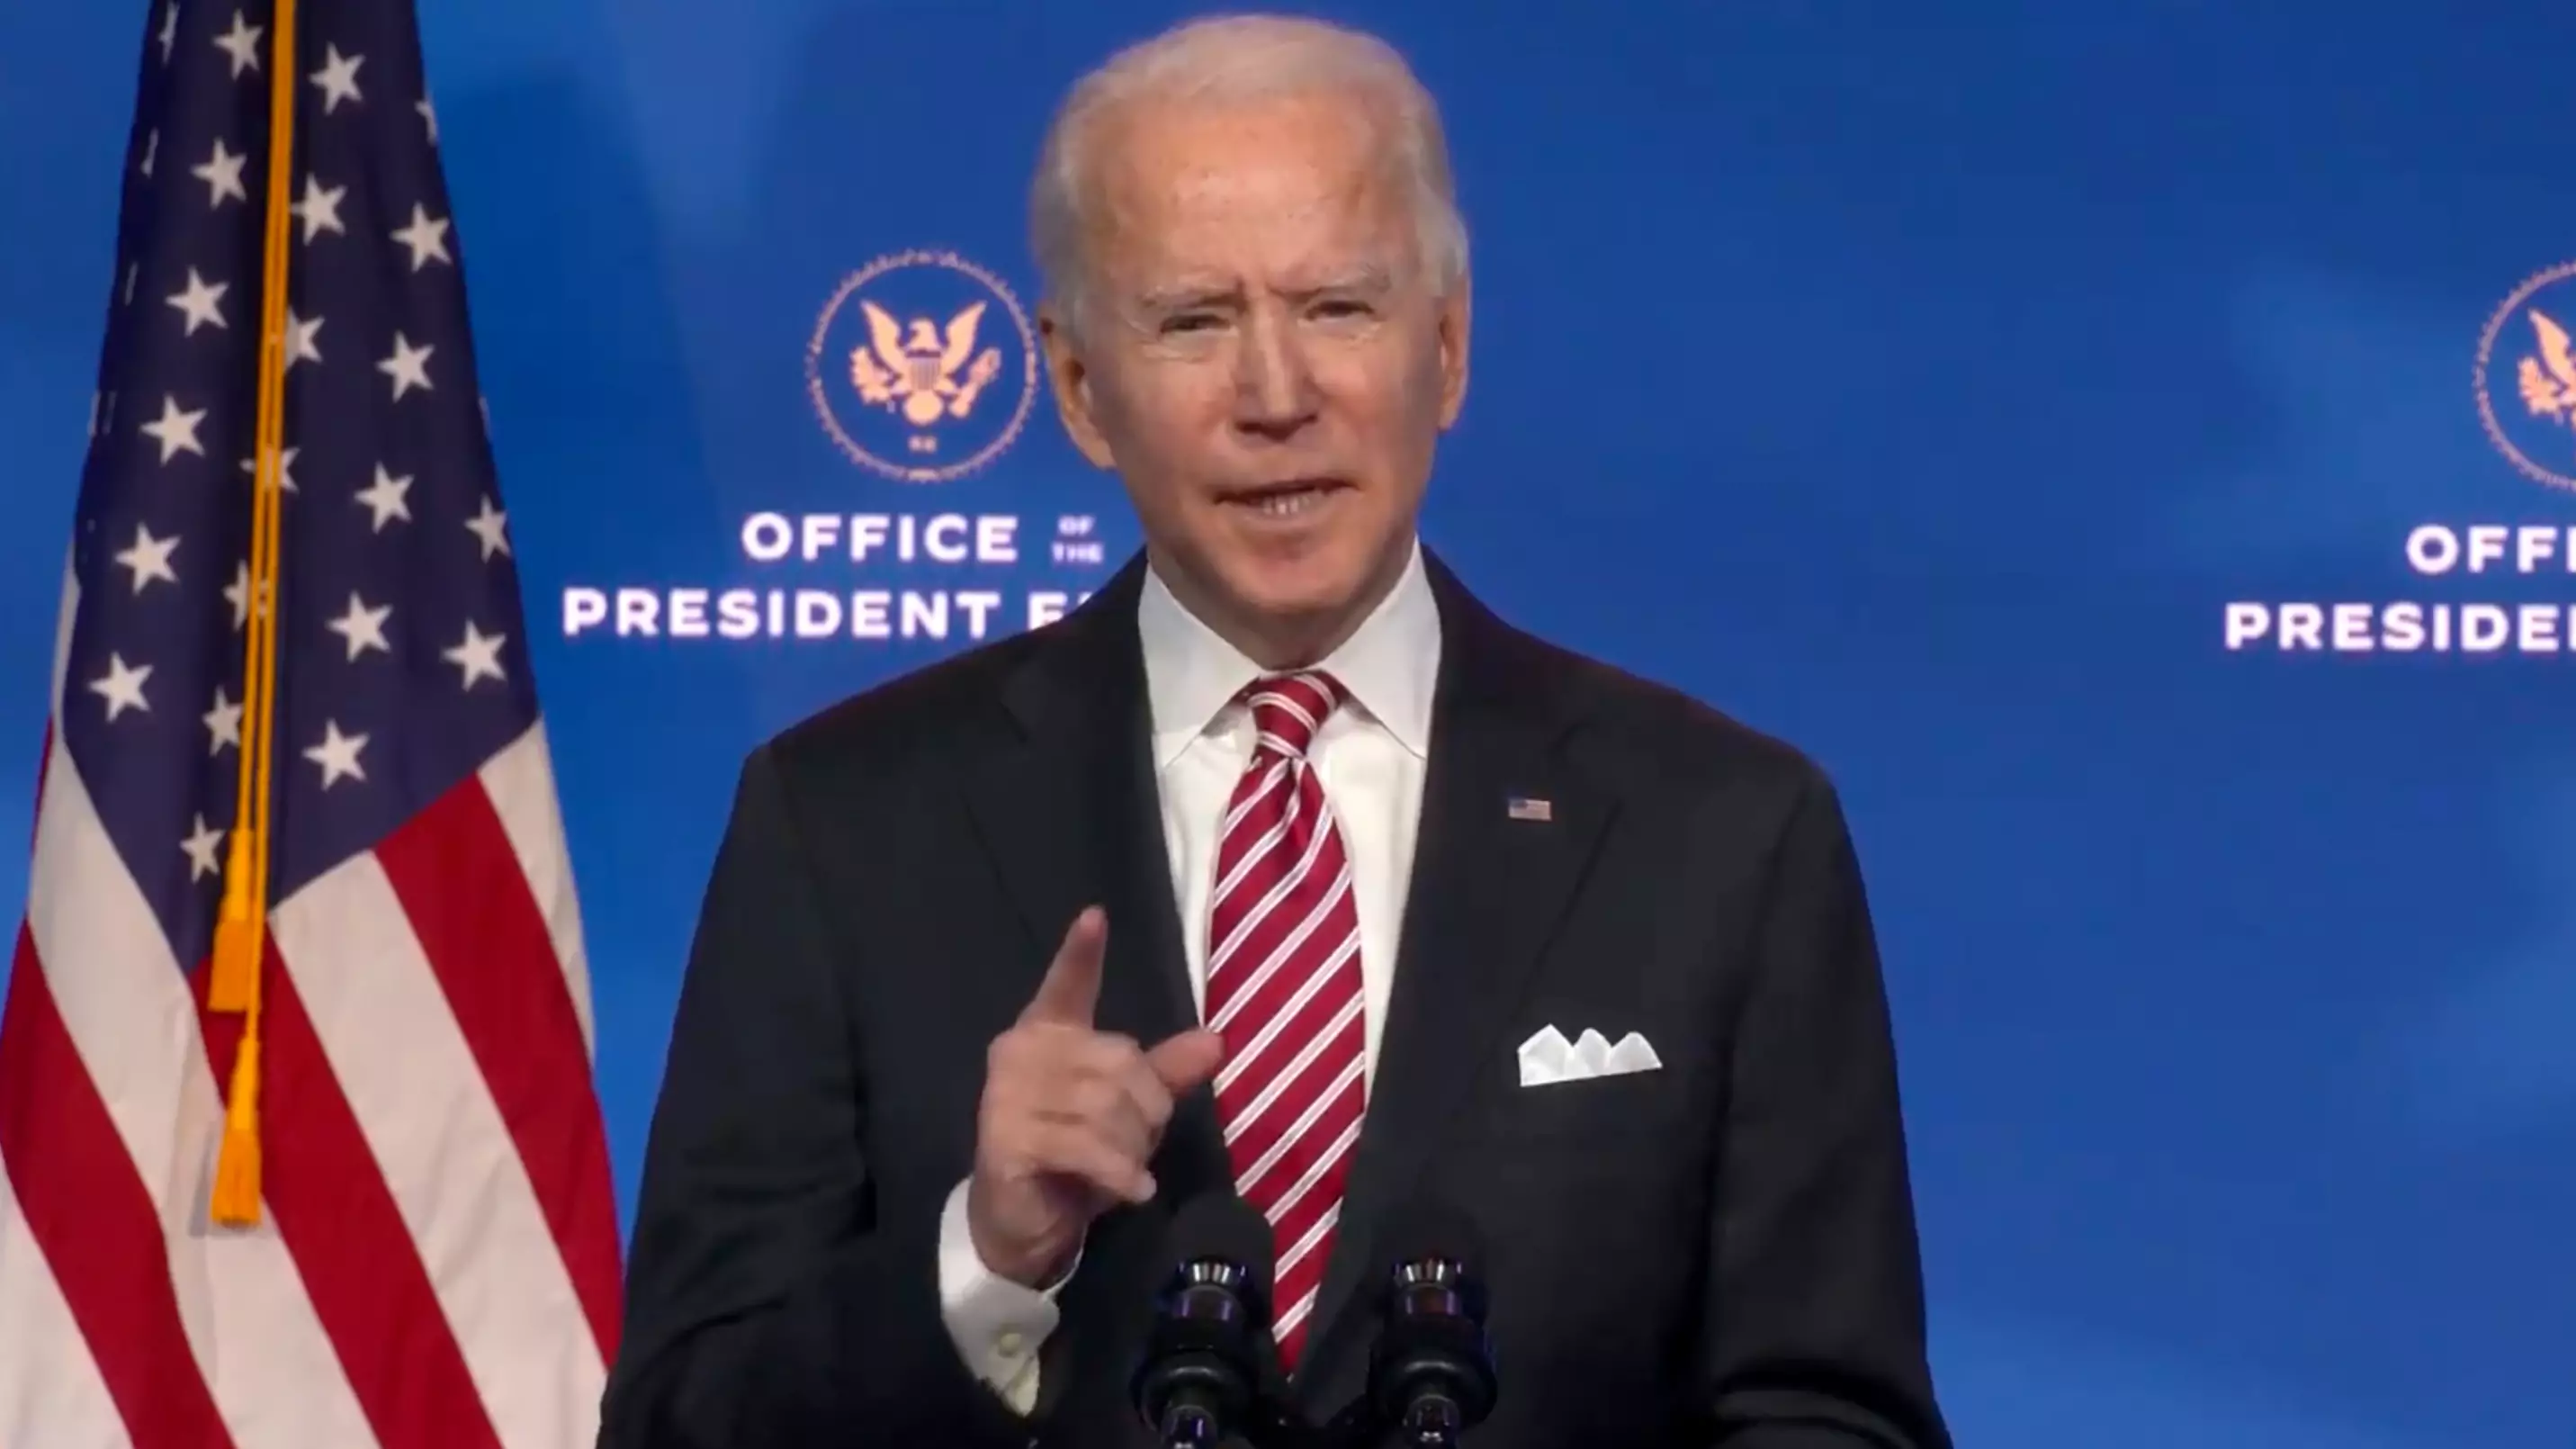 Joe Biden Will Give Free College To Students From Low Socioeconomic Backgrounds